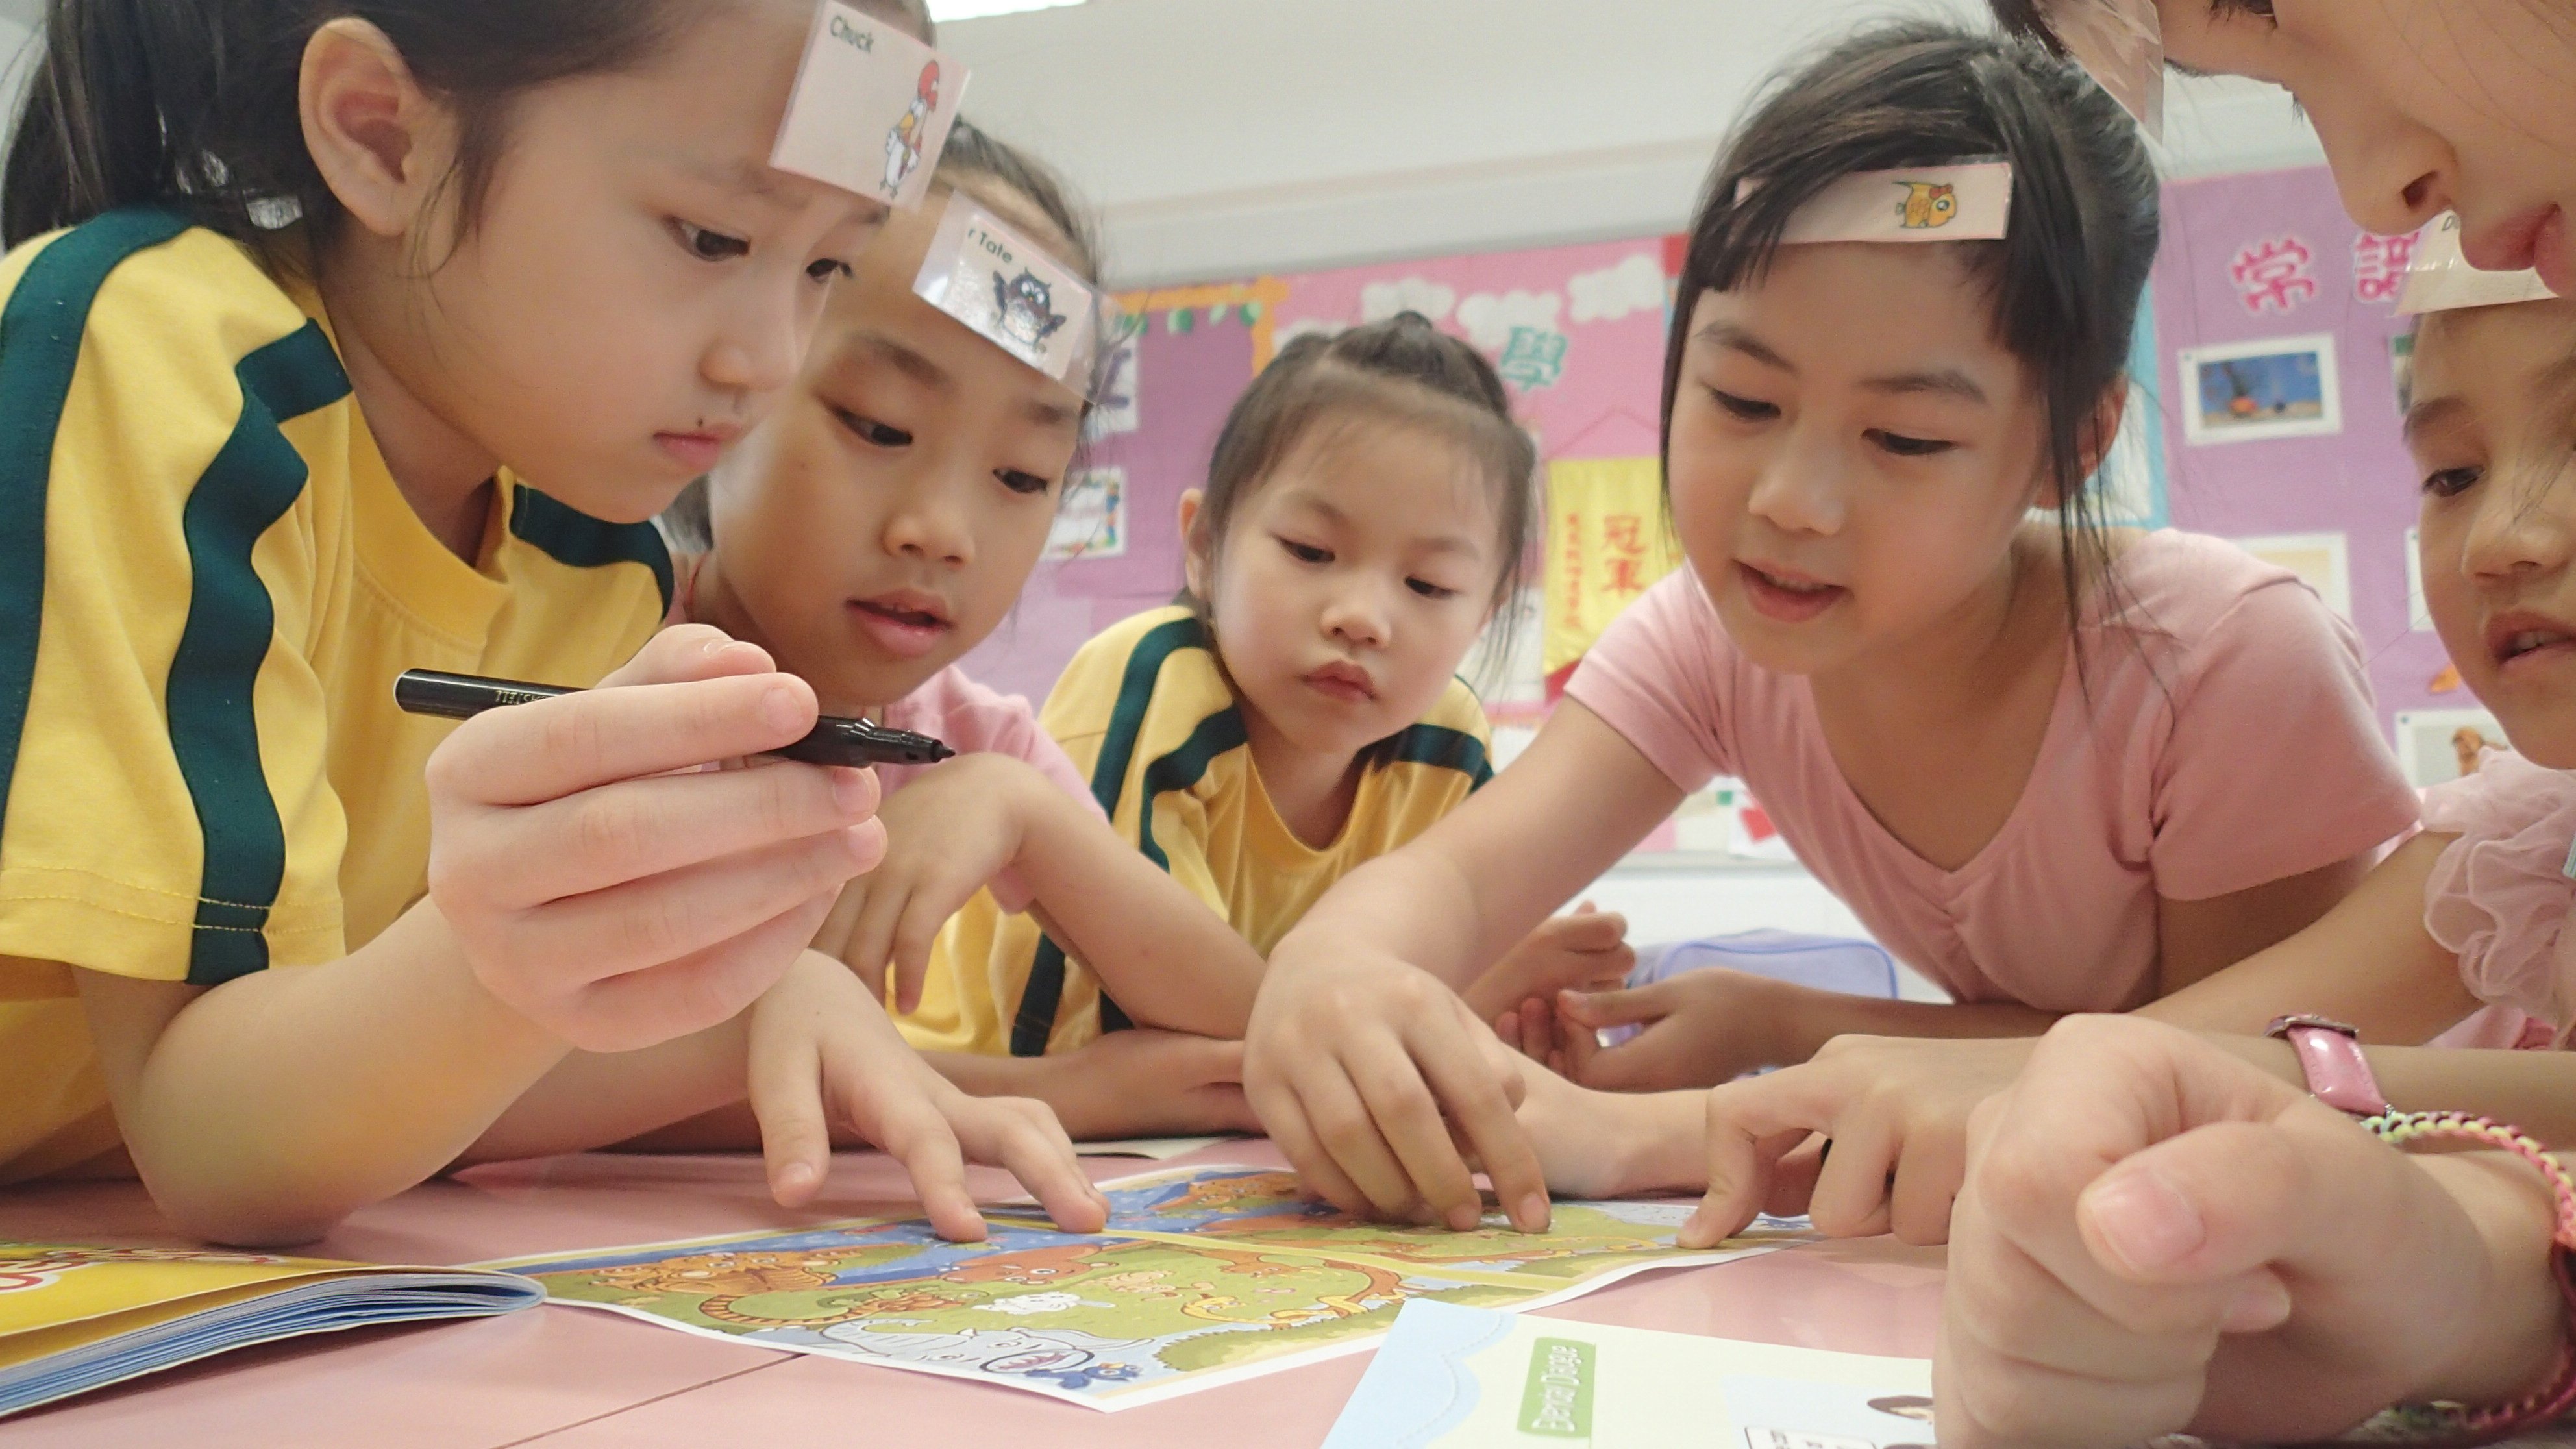 TEFL kindergarten students are playing at the desk